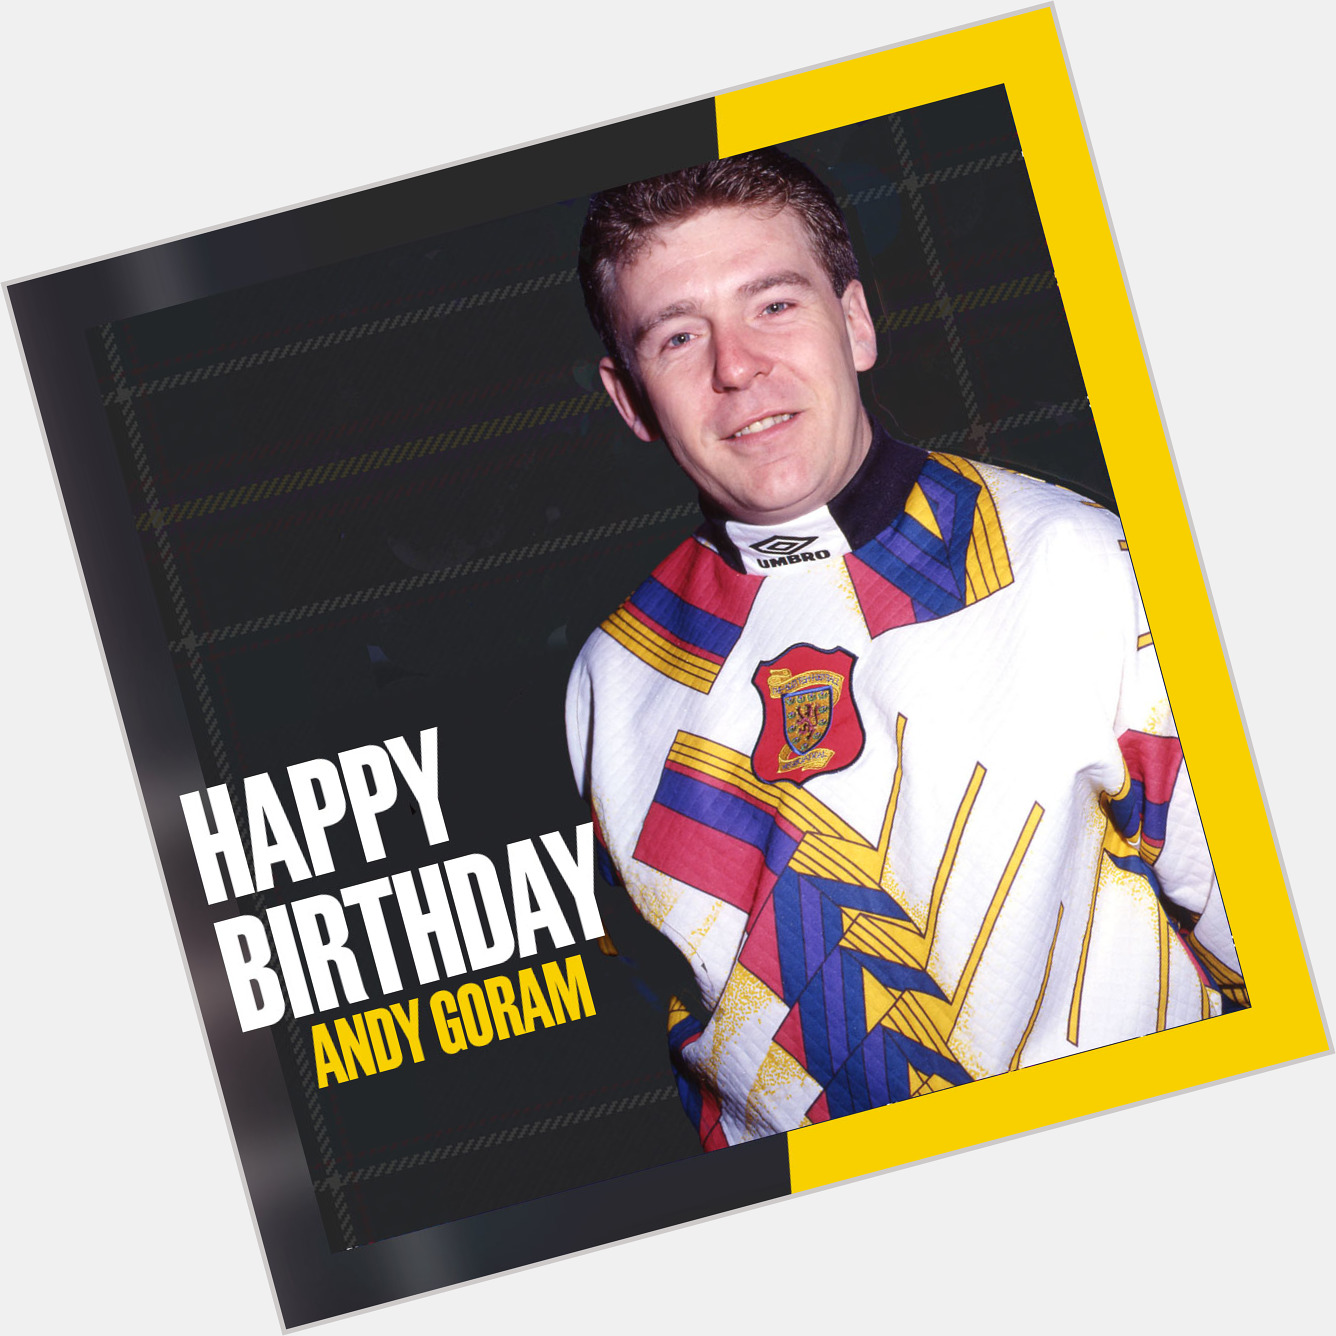 Happy Birthday Andy Goram 43       caps, lots of saves and great memories 